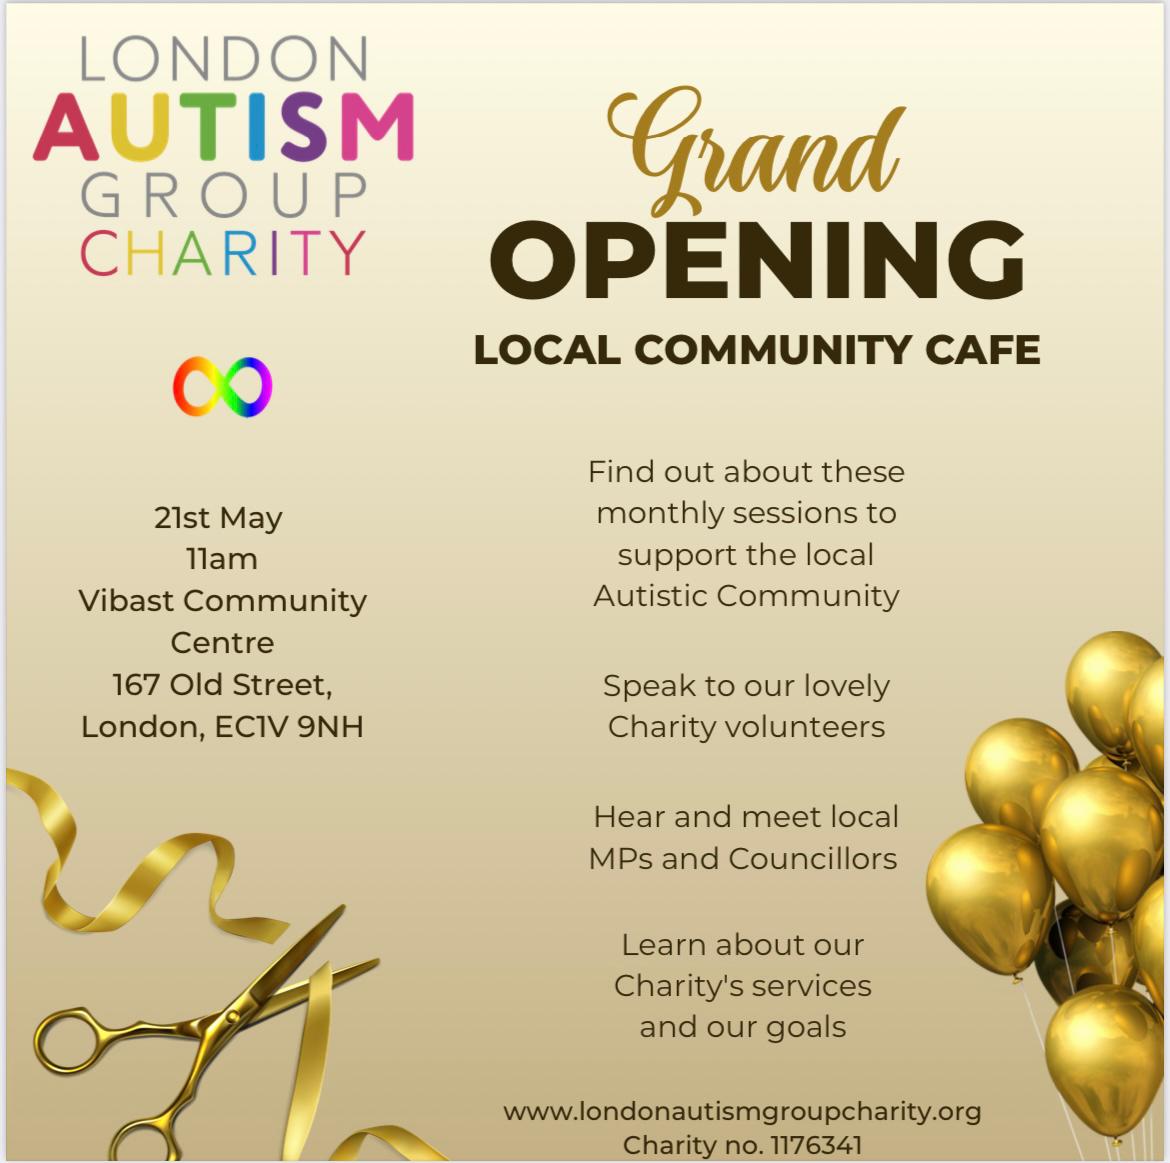 The London Autism Group Charity are officially launching our Community Cafe sessions at the Vibast Community Centre in Old Street Islington. 
Sessions will be held every third Sunday of the month, at 11am to 1pm. 

There will be a brief launch ceremony on Sunday 21st May at 11am.